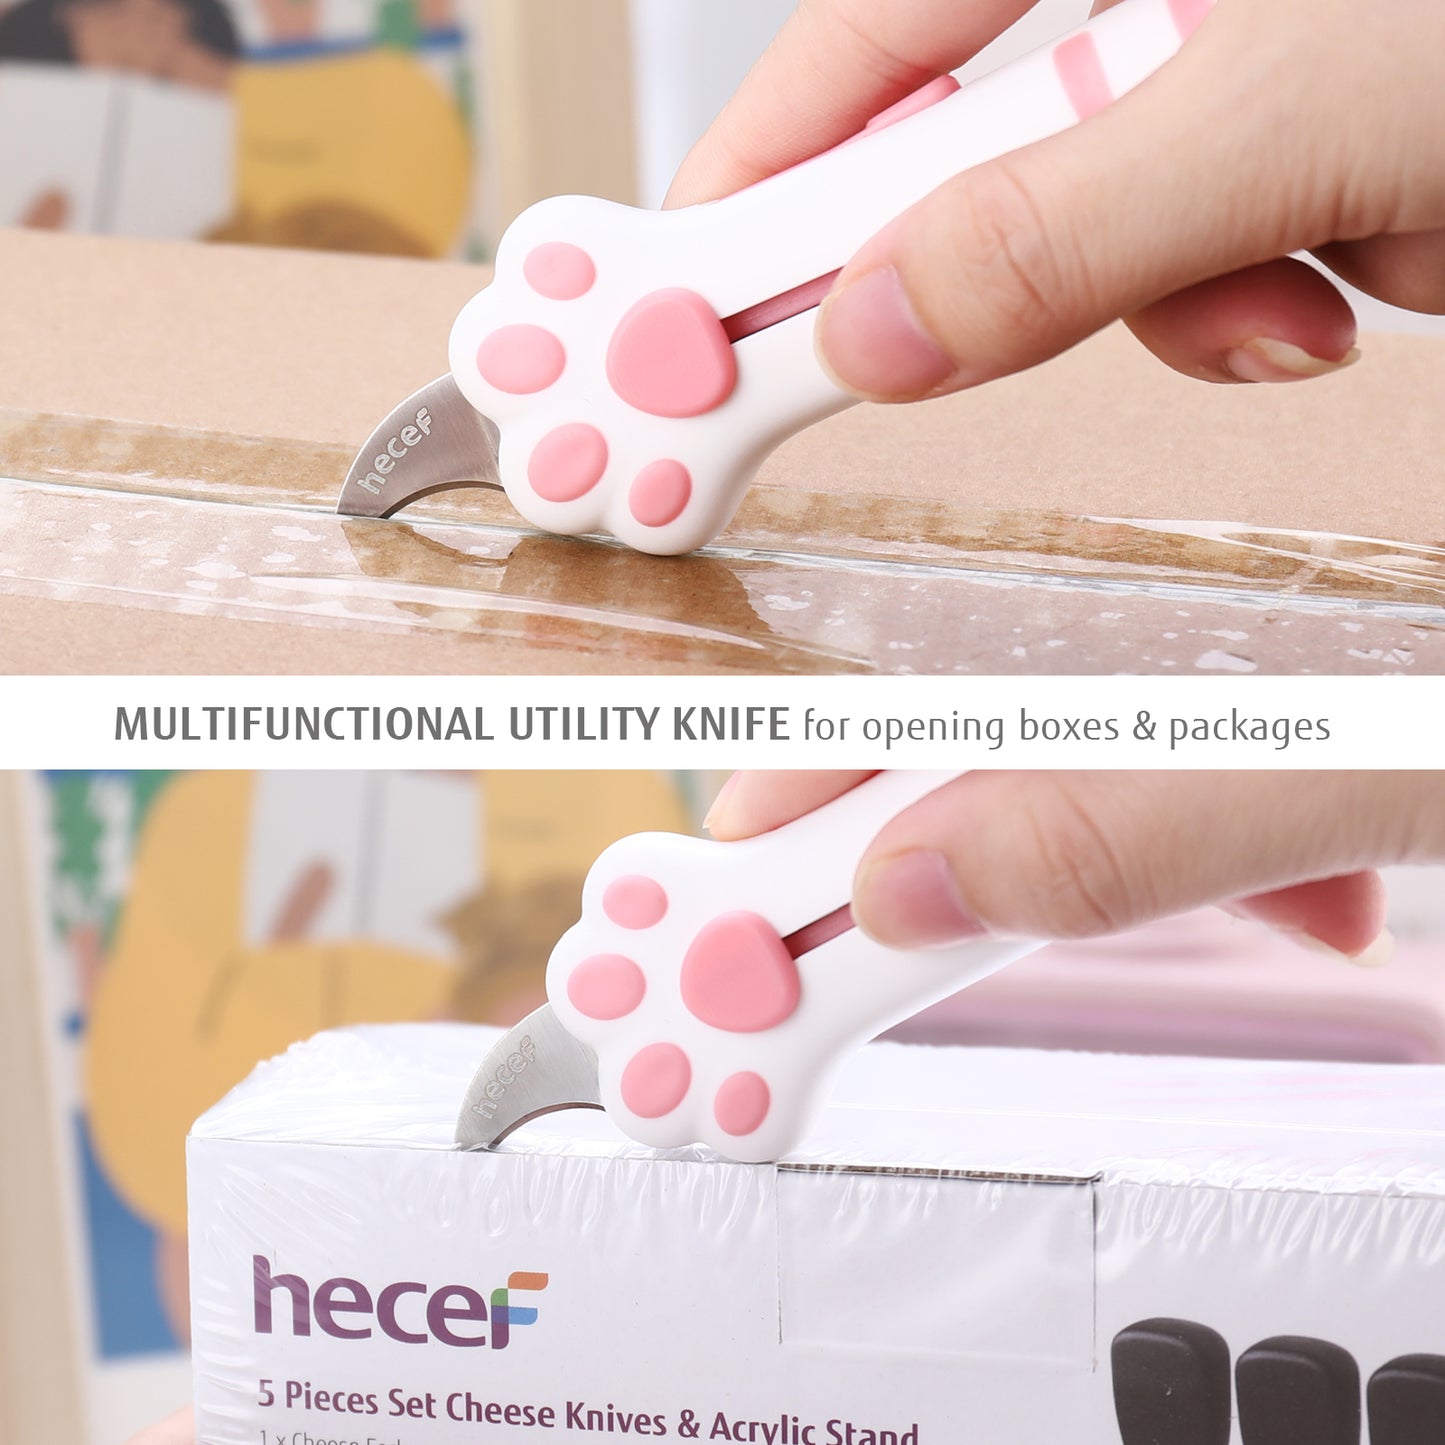 Hecef Cutter Knife Pack of 3, Retractable Box Opener with German Steel Blade and Cat Paw Handle, Multifunctional Utility Knife for Opening Box, Envelope, Letters and Vouchers - Hecef Kitchen